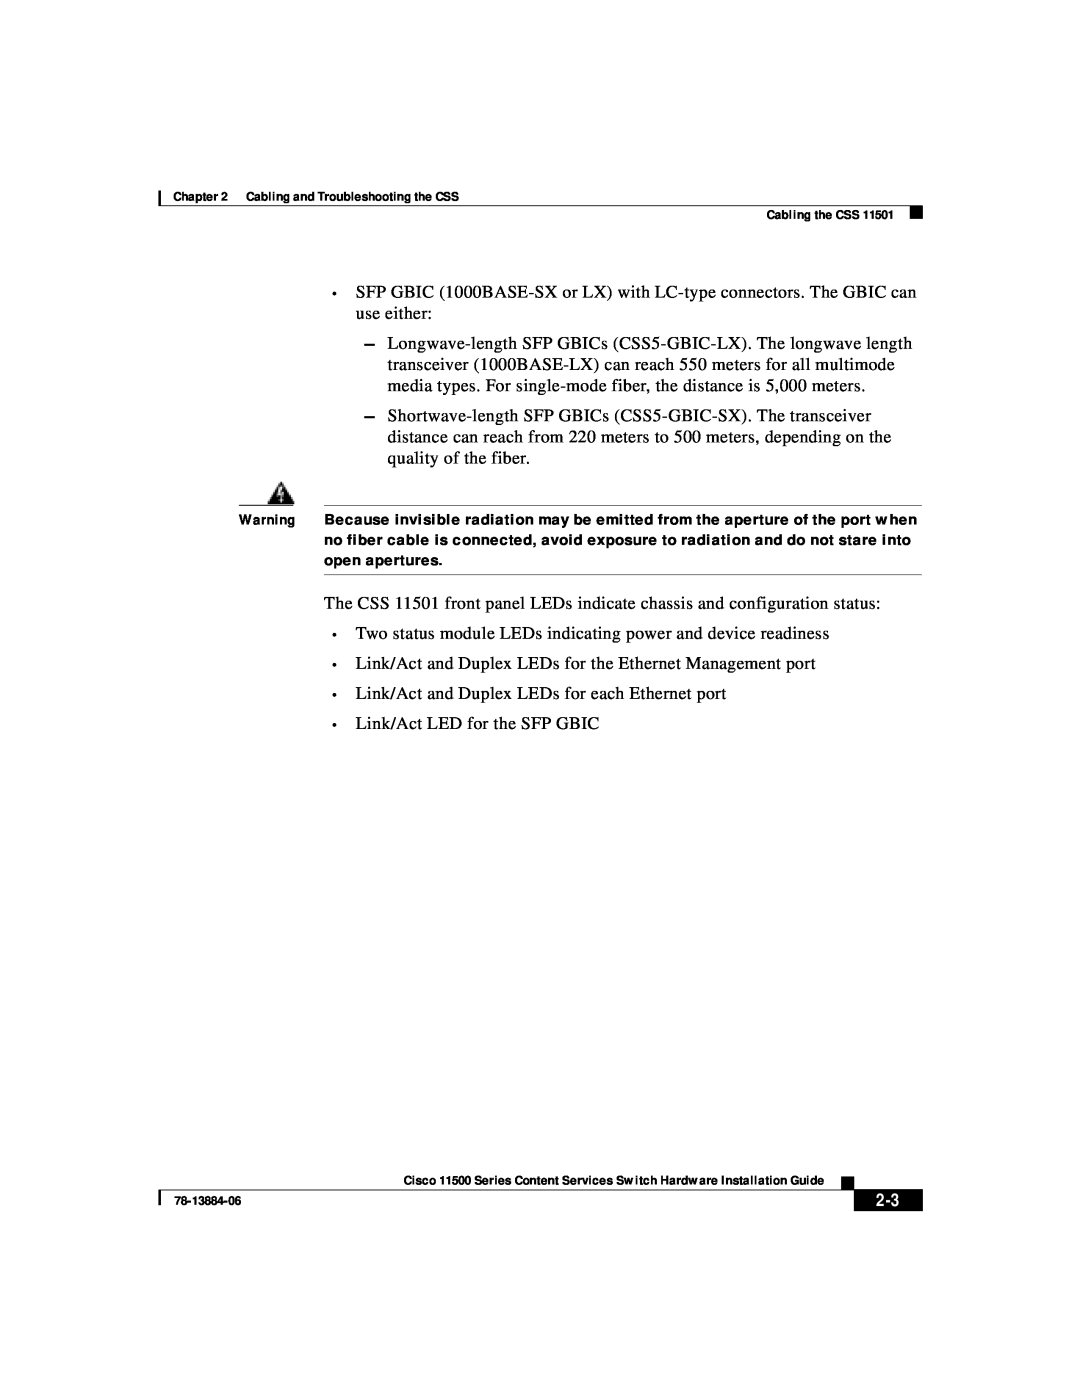 Cisco Systems 11500 Series manual Two status module LEDs indicating power and device readiness 